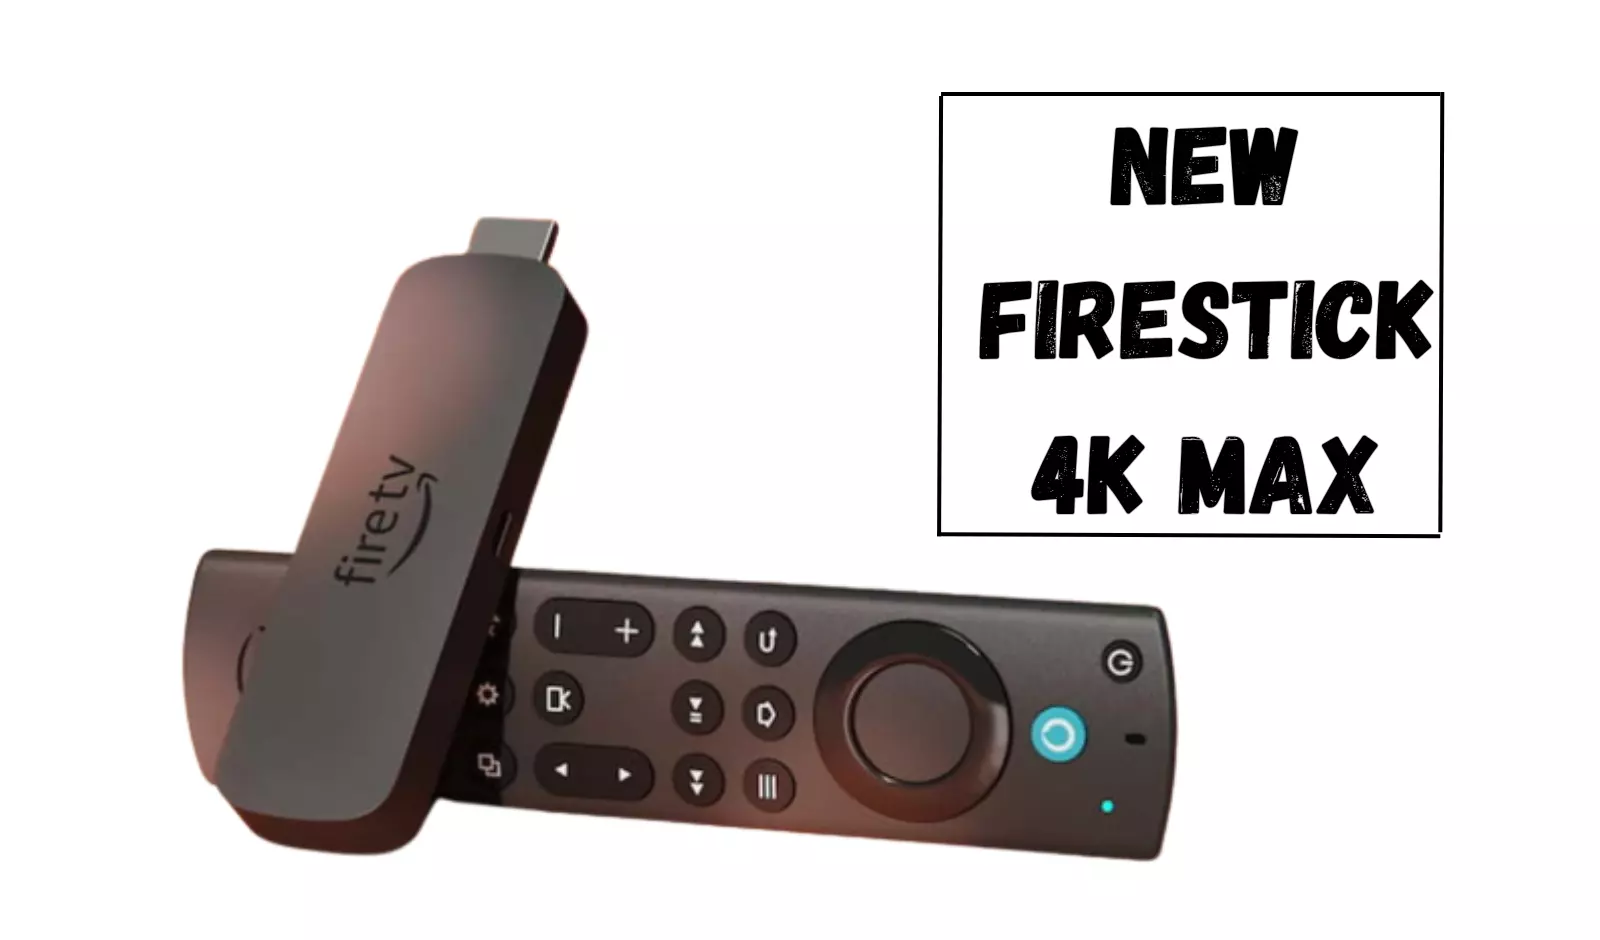 New Fire TV Stick 4K Max Improved Remote, More Storage, Faster WiFi, and More!